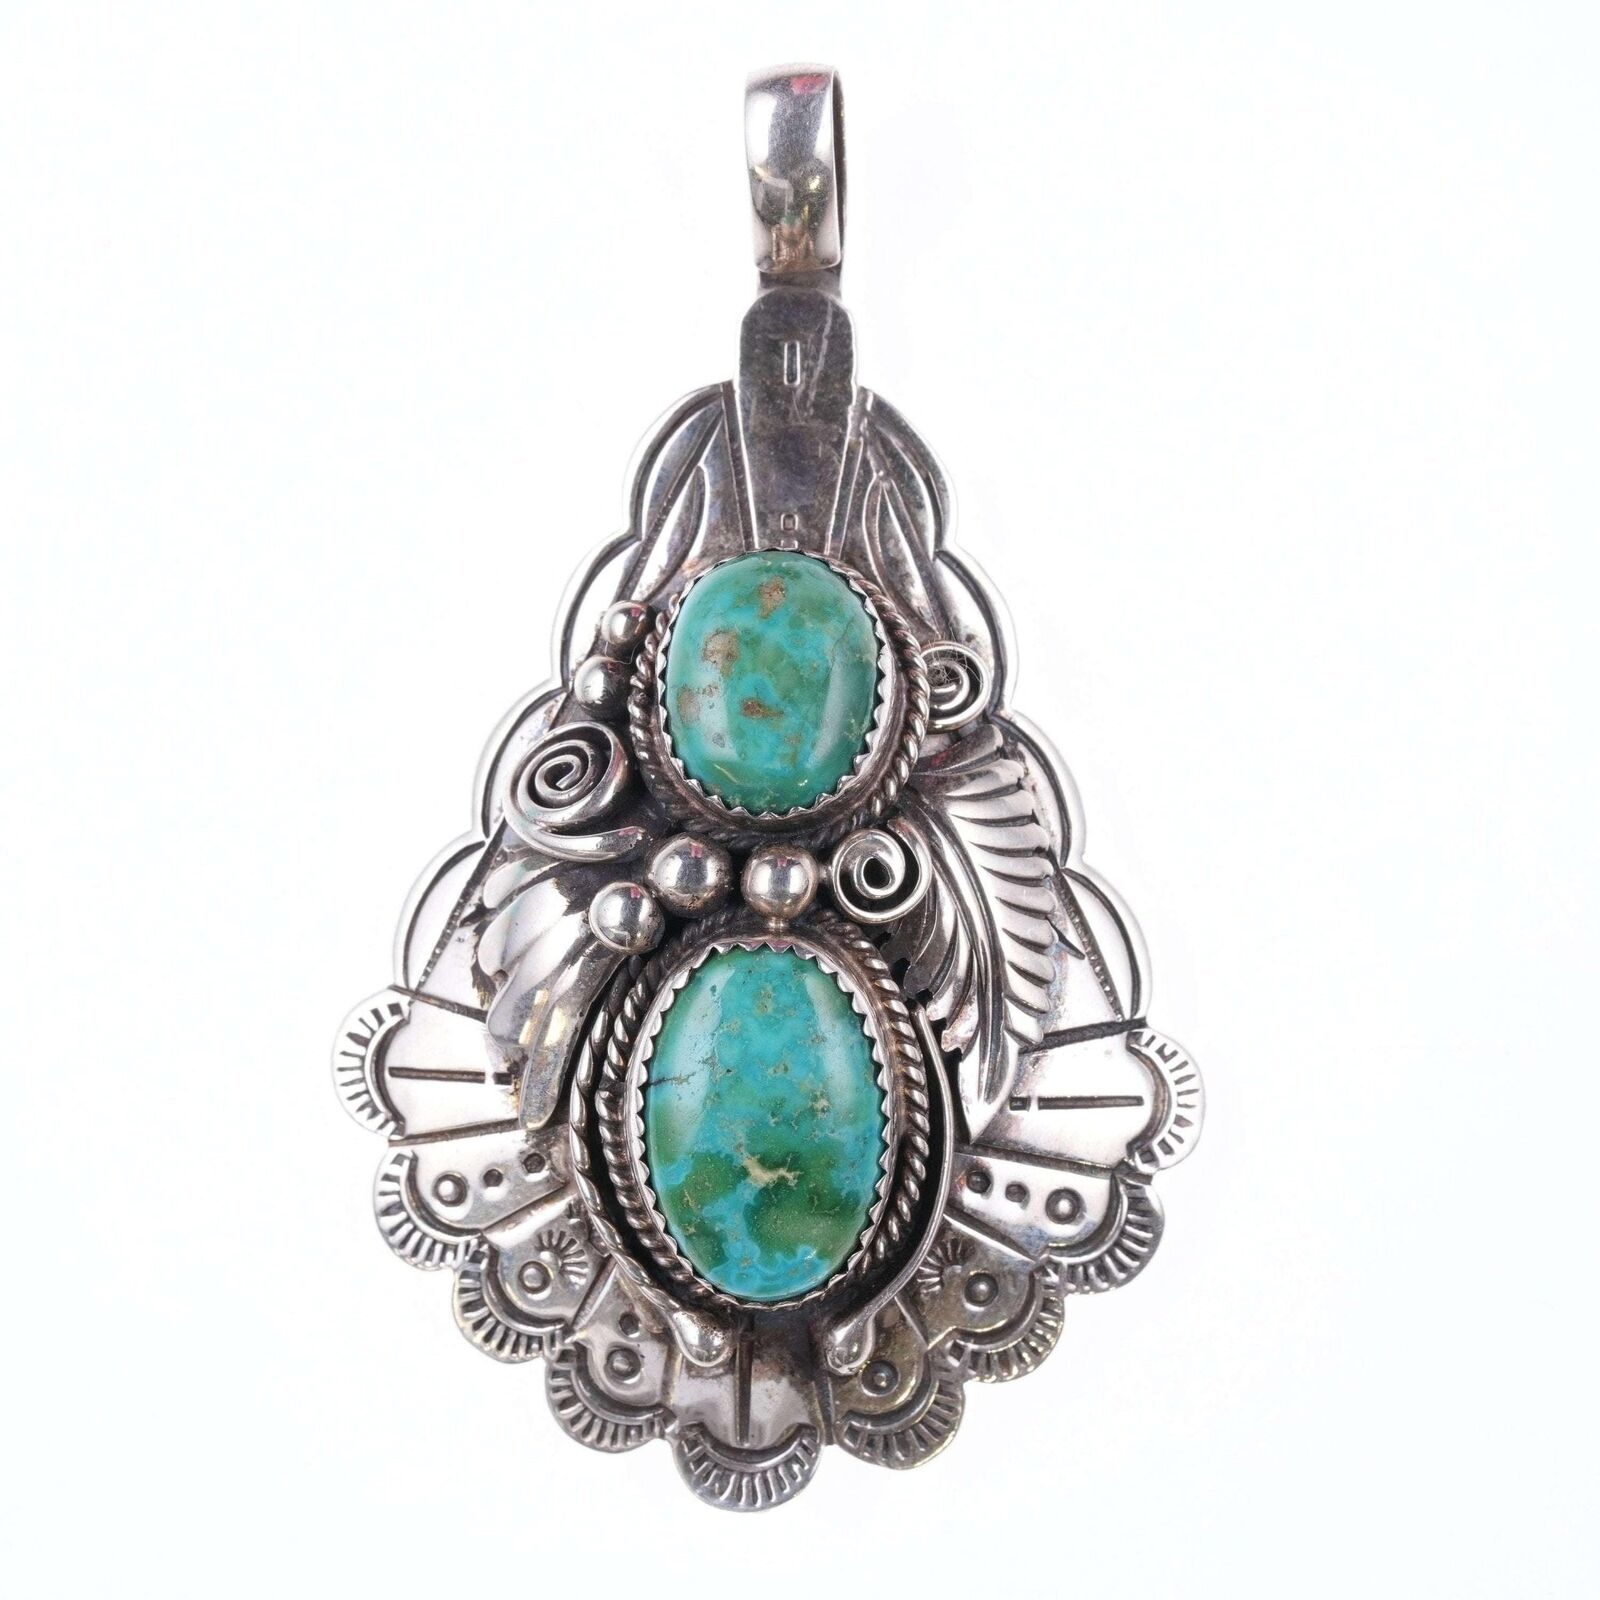 Lowell Draper Navajo sterling and turquoise pendant